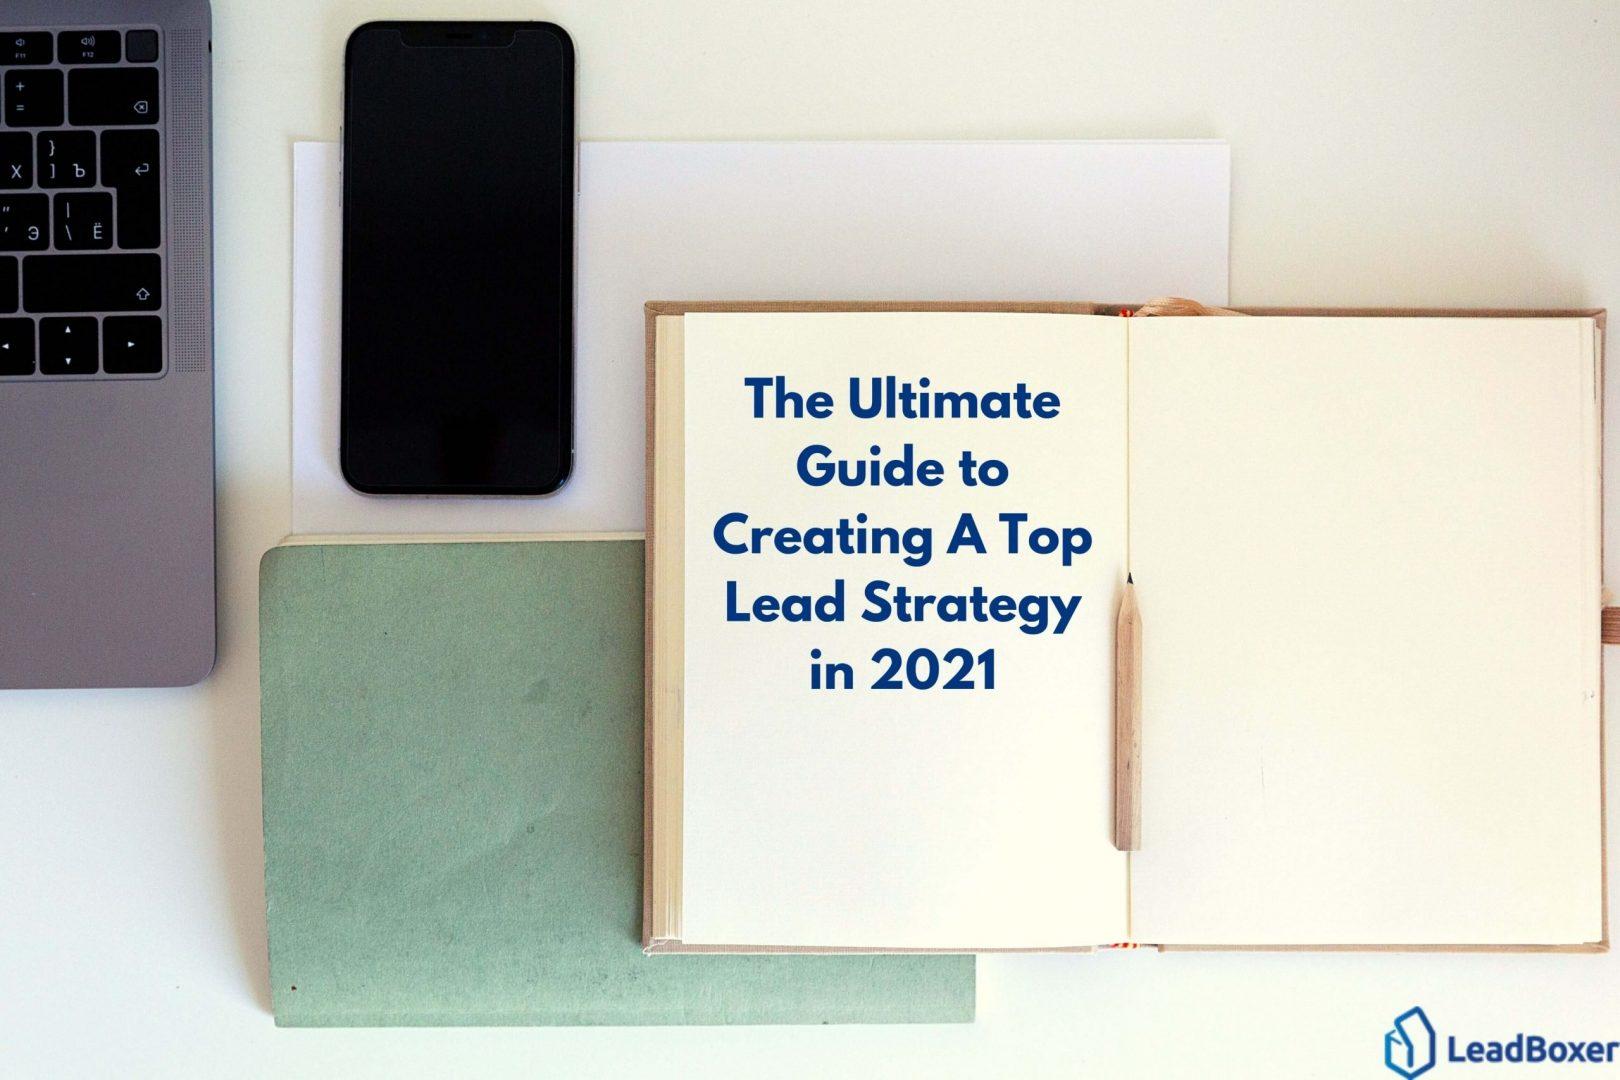 The Ultimate Guide to Creating A Top Lead Strategy in 2021